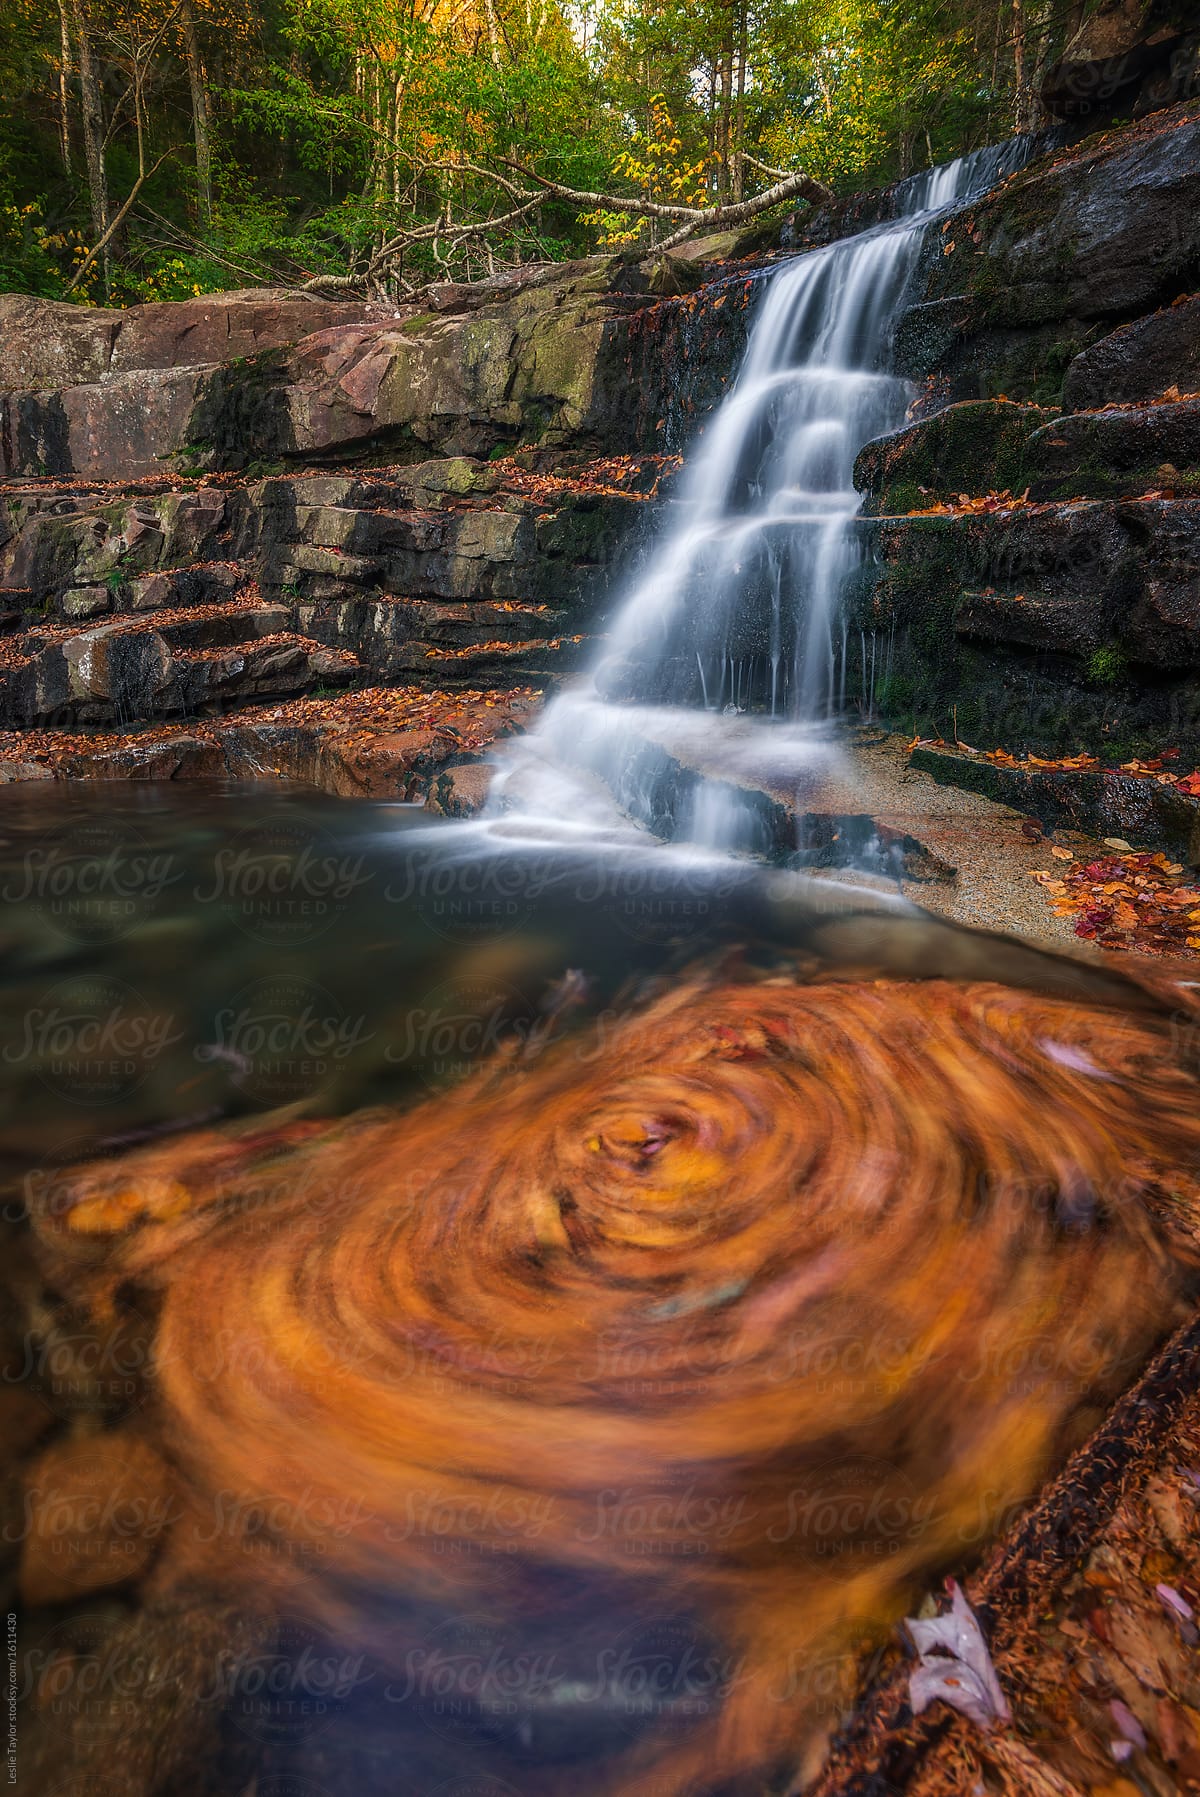 Swirling Leaves At A Waterfall In Autumn